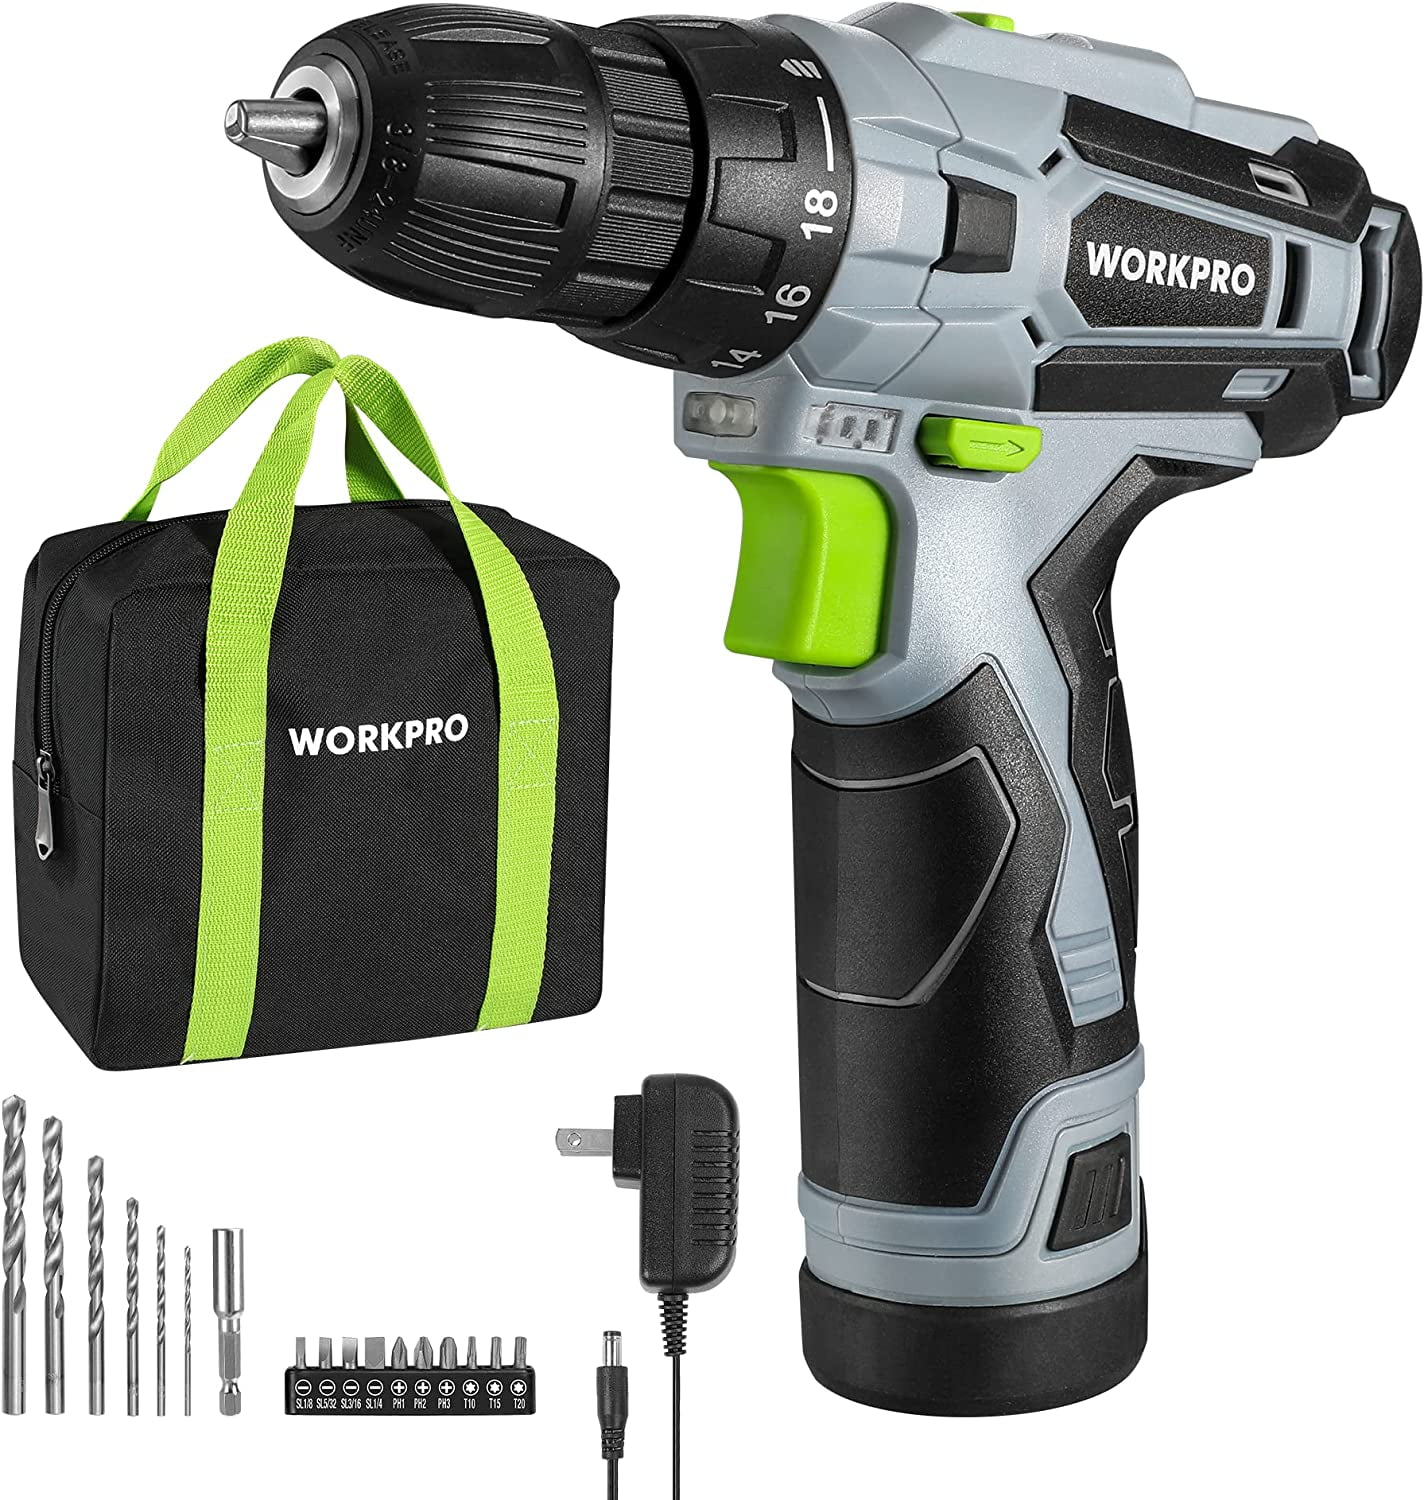 WORKPRO Cordless Drill Driver Kit, 12V Electric Screwdriver Driver Tool Kit  for Women, 3/8